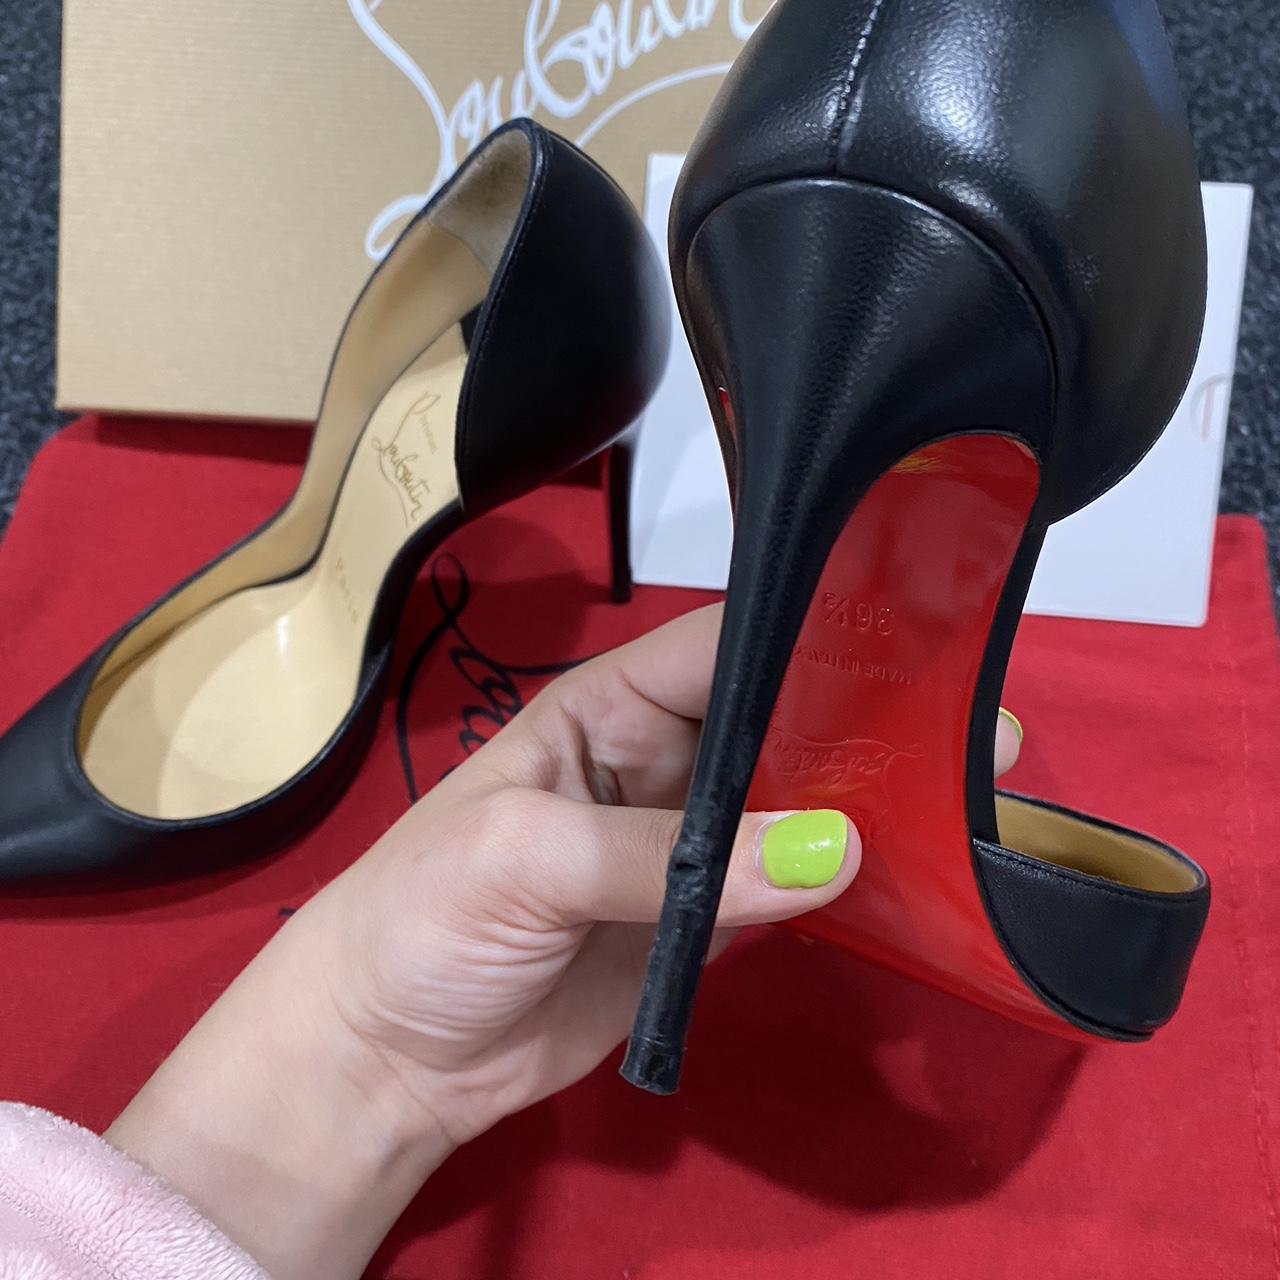 Christian Louboutin Women's Black and Red Courts (3)